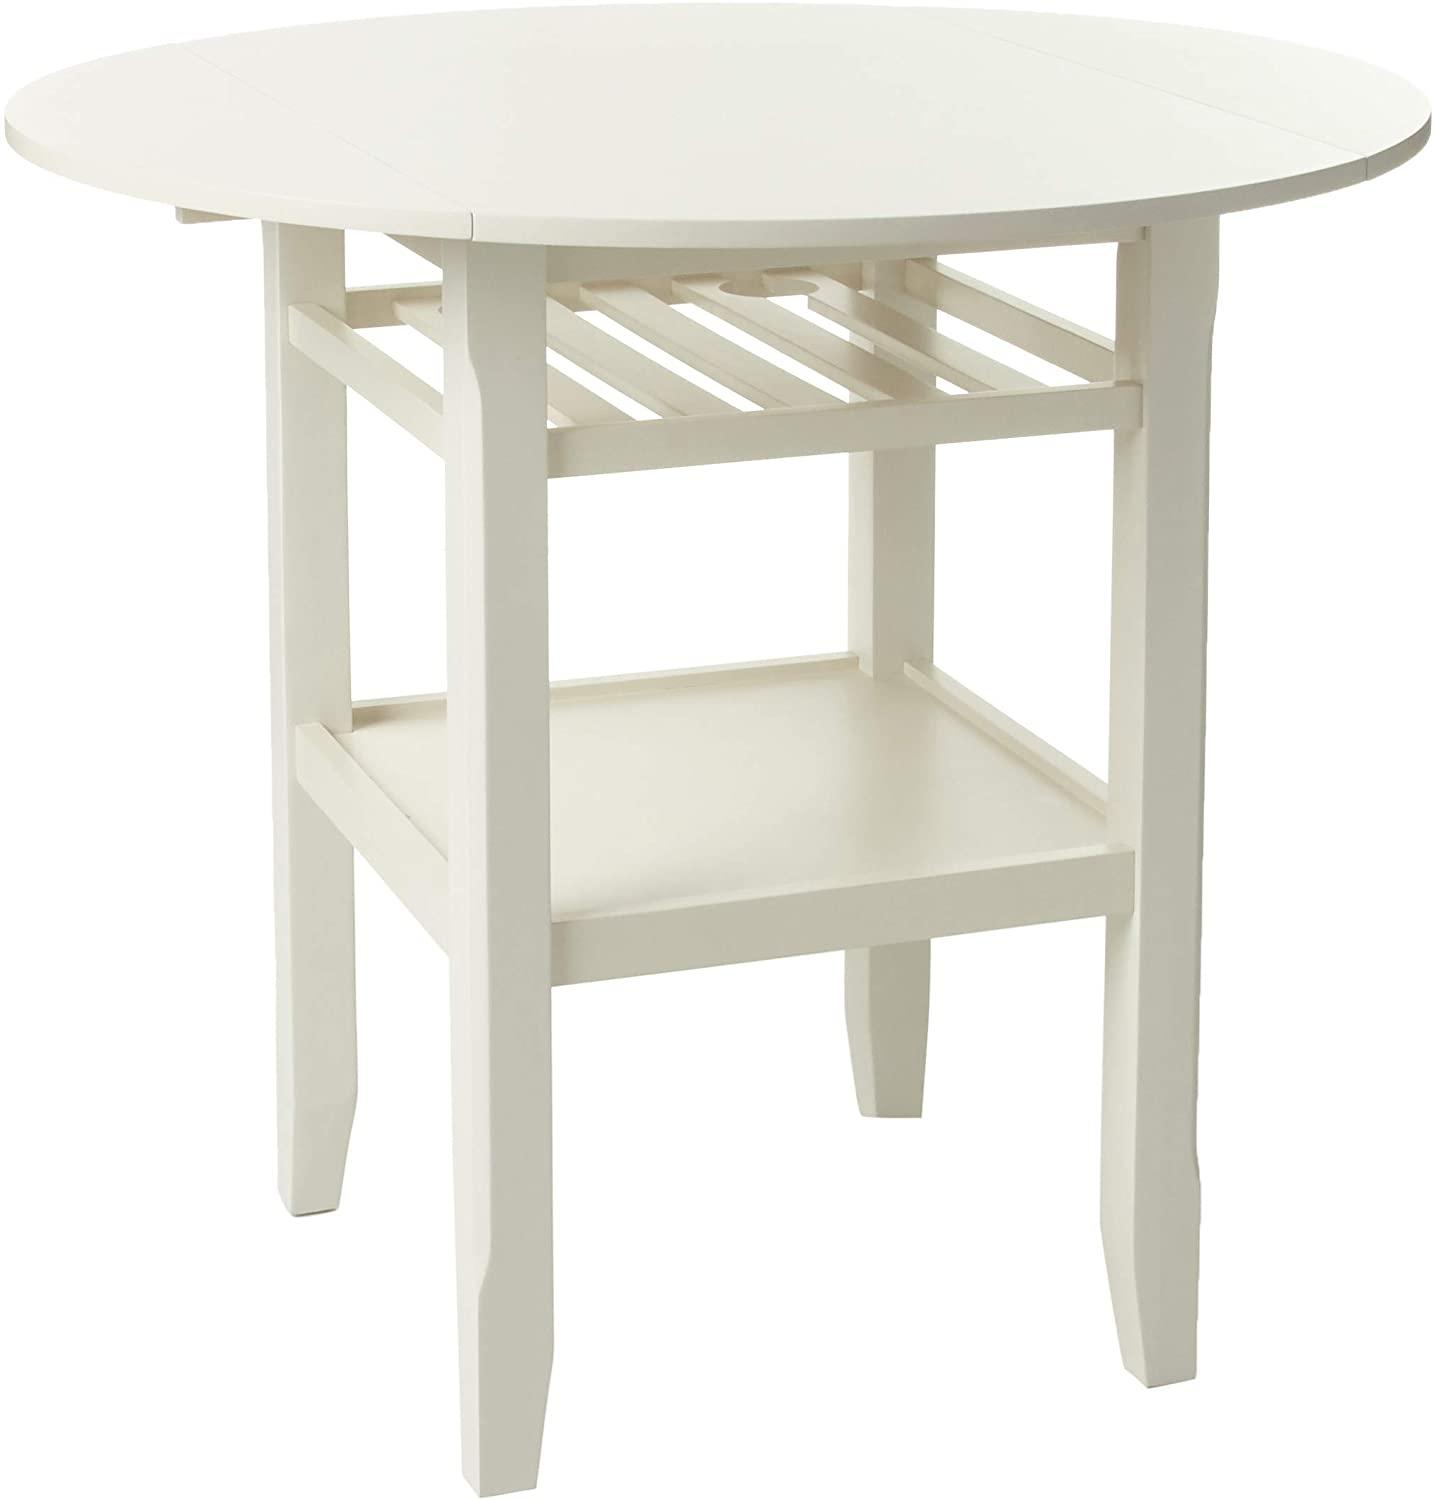 Modern Counter Height Table Tartys 72545 in Cream 